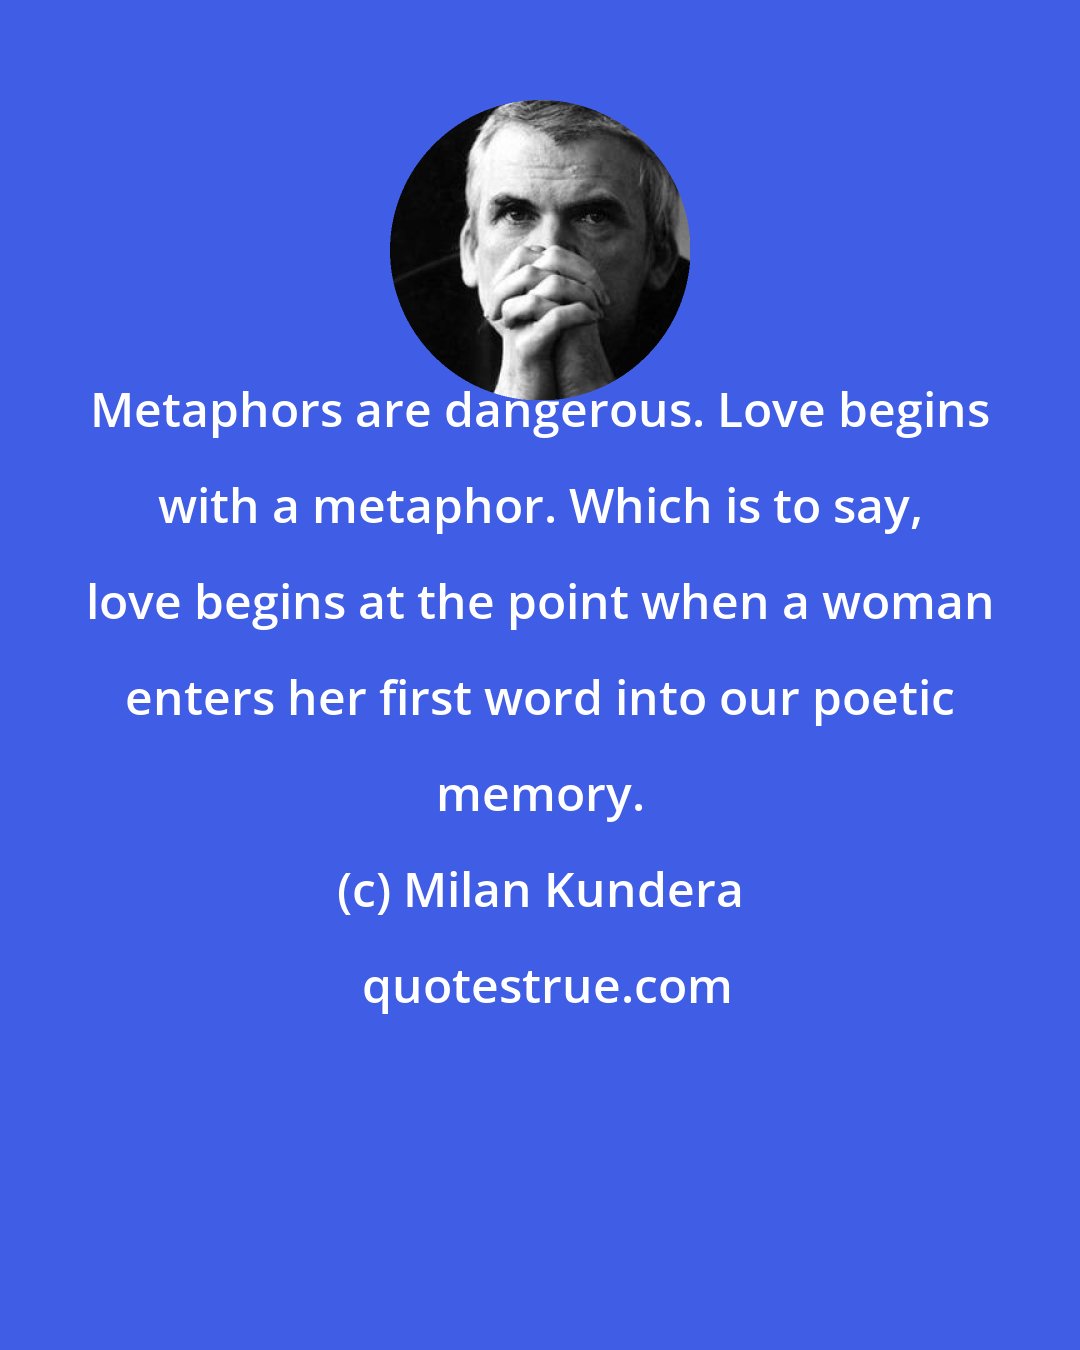 Milan Kundera: Metaphors are dangerous. Love begins with a metaphor. Which is to say, love begins at the point when a woman enters her first word into our poetic memory.